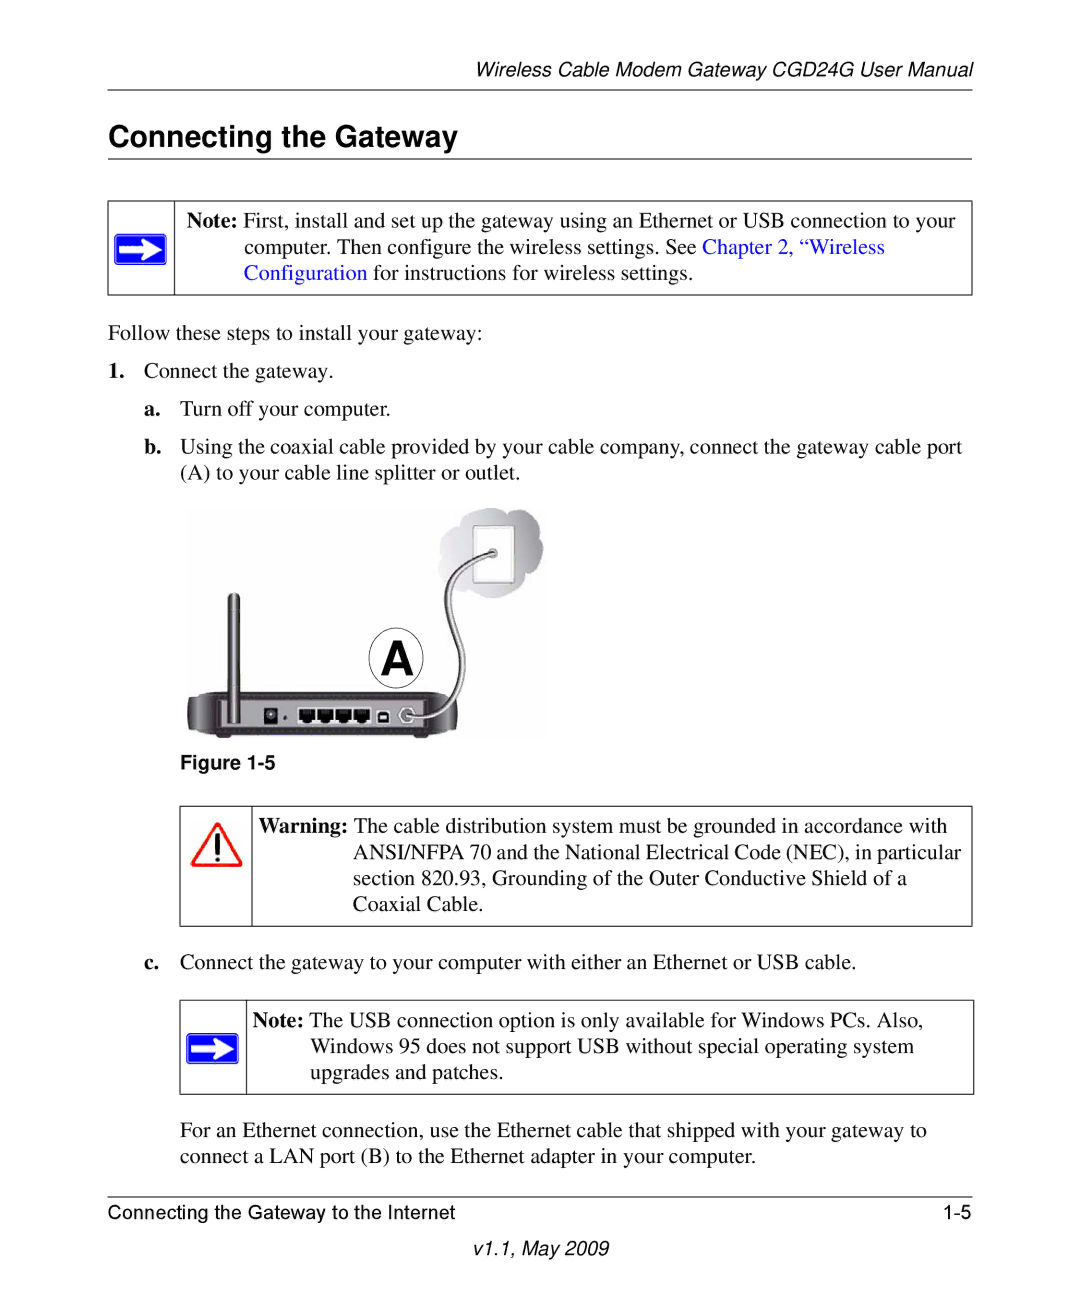 Gateway CGD24G user manual Connecting the Gateway 